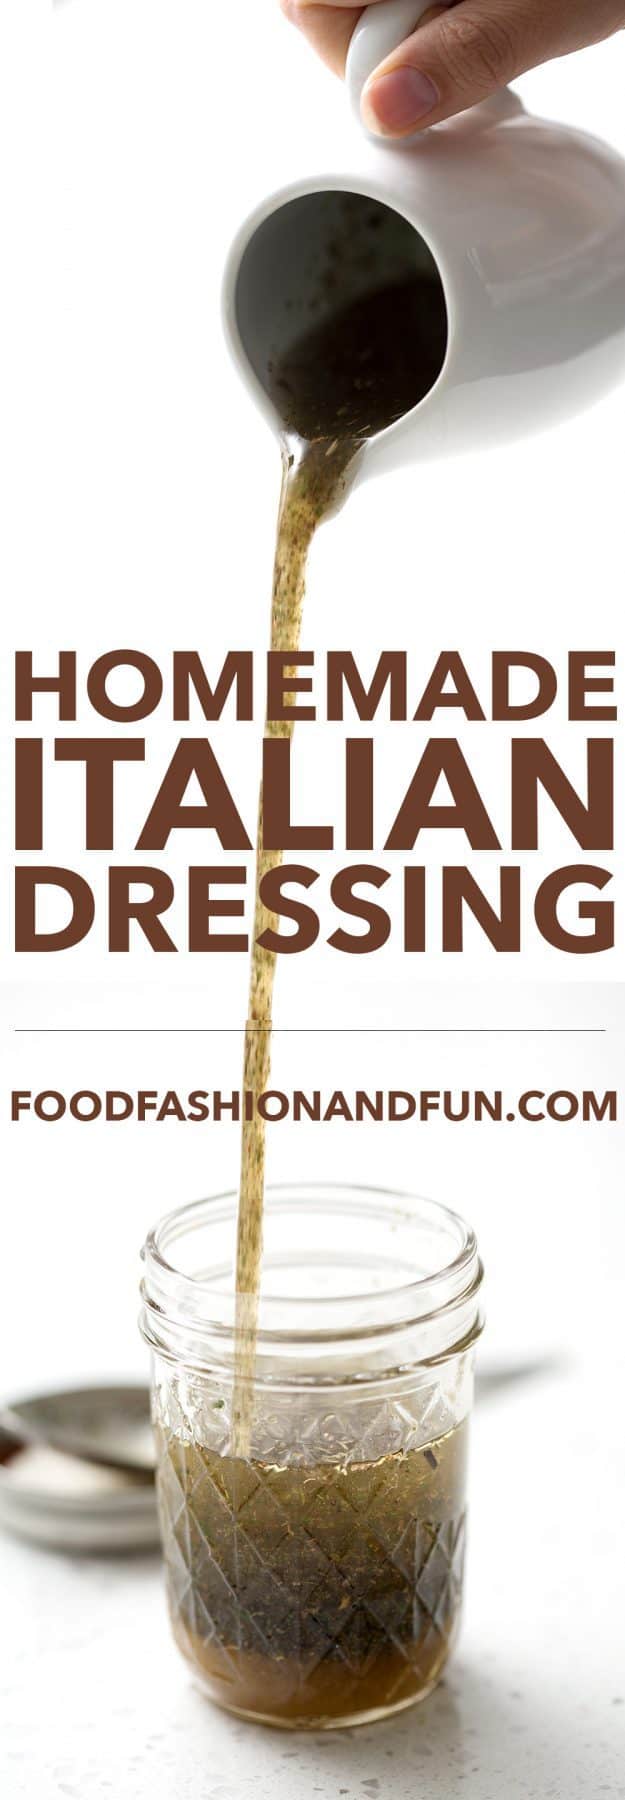 Easy Italian Dressing recipe made of pantry staples. With this recipe, you’ll never have to buy store-bought again. This recipe is allergy friendly (gluten, dairy, seafood, nut, egg, and soy free) and suits the autoimmune protocol, paleo and vegan diet.